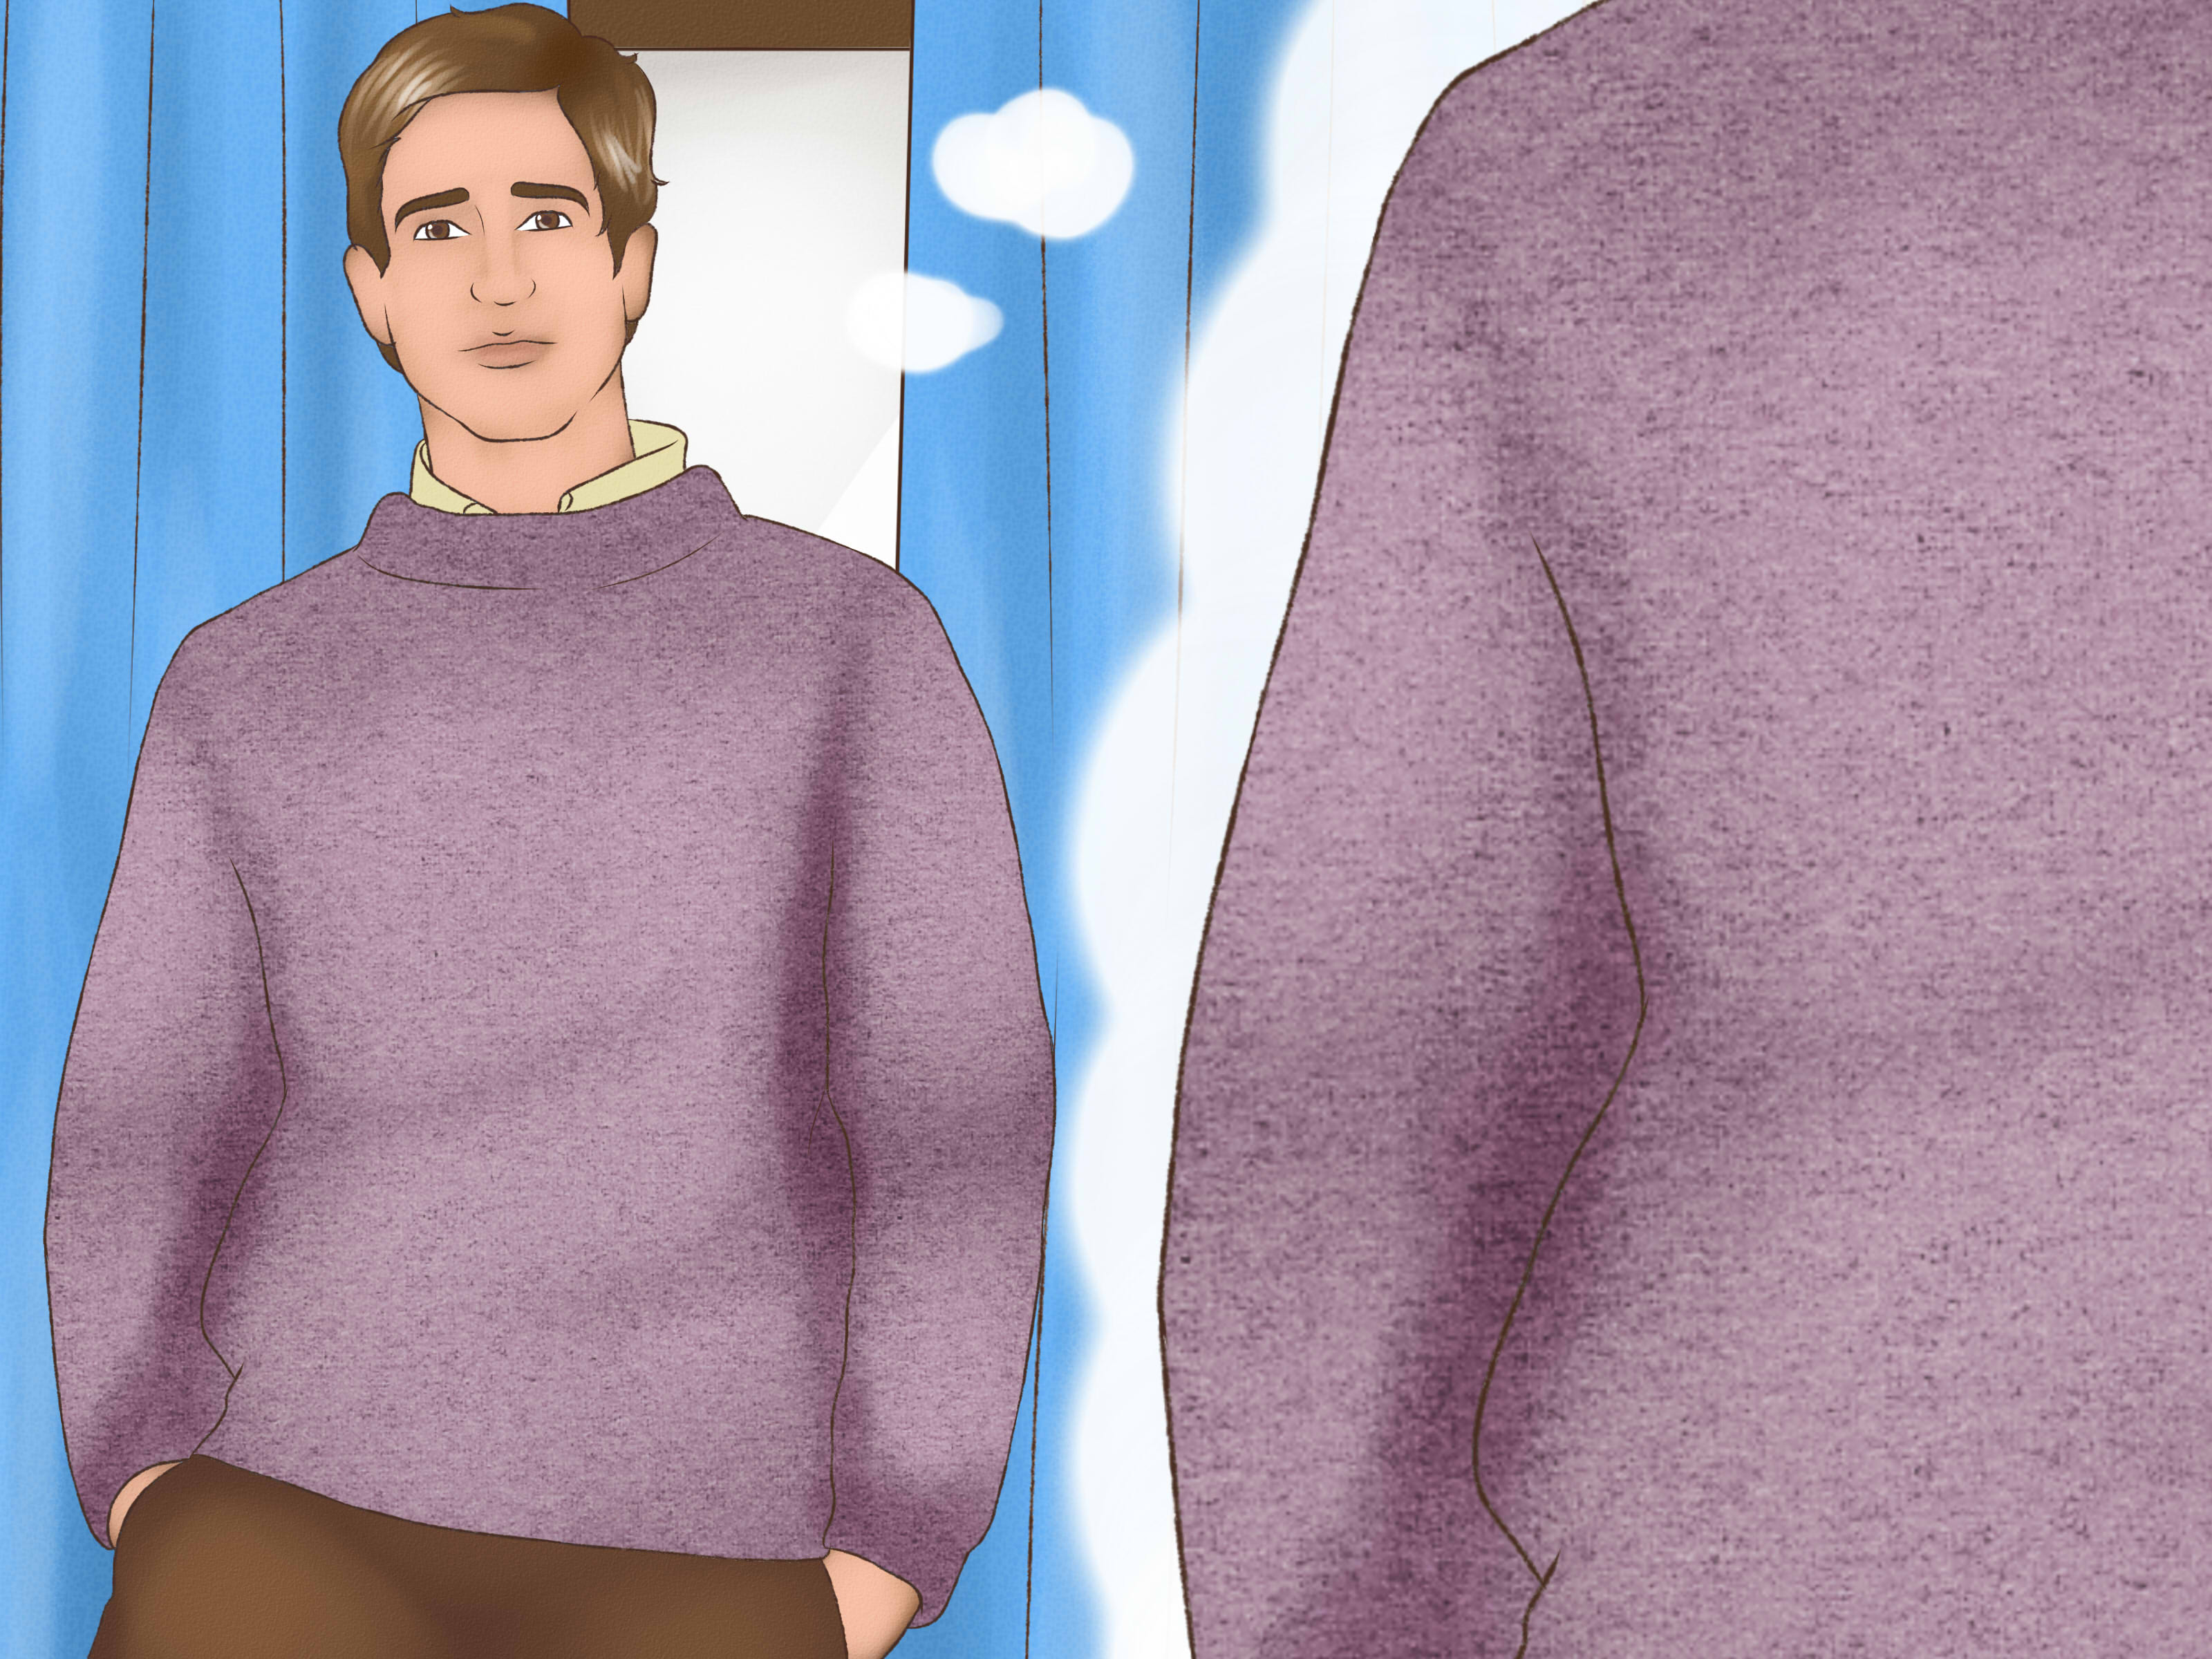 How to Wear Sweaters (for Men): 12 Steps (with Pictures) - wikiHow